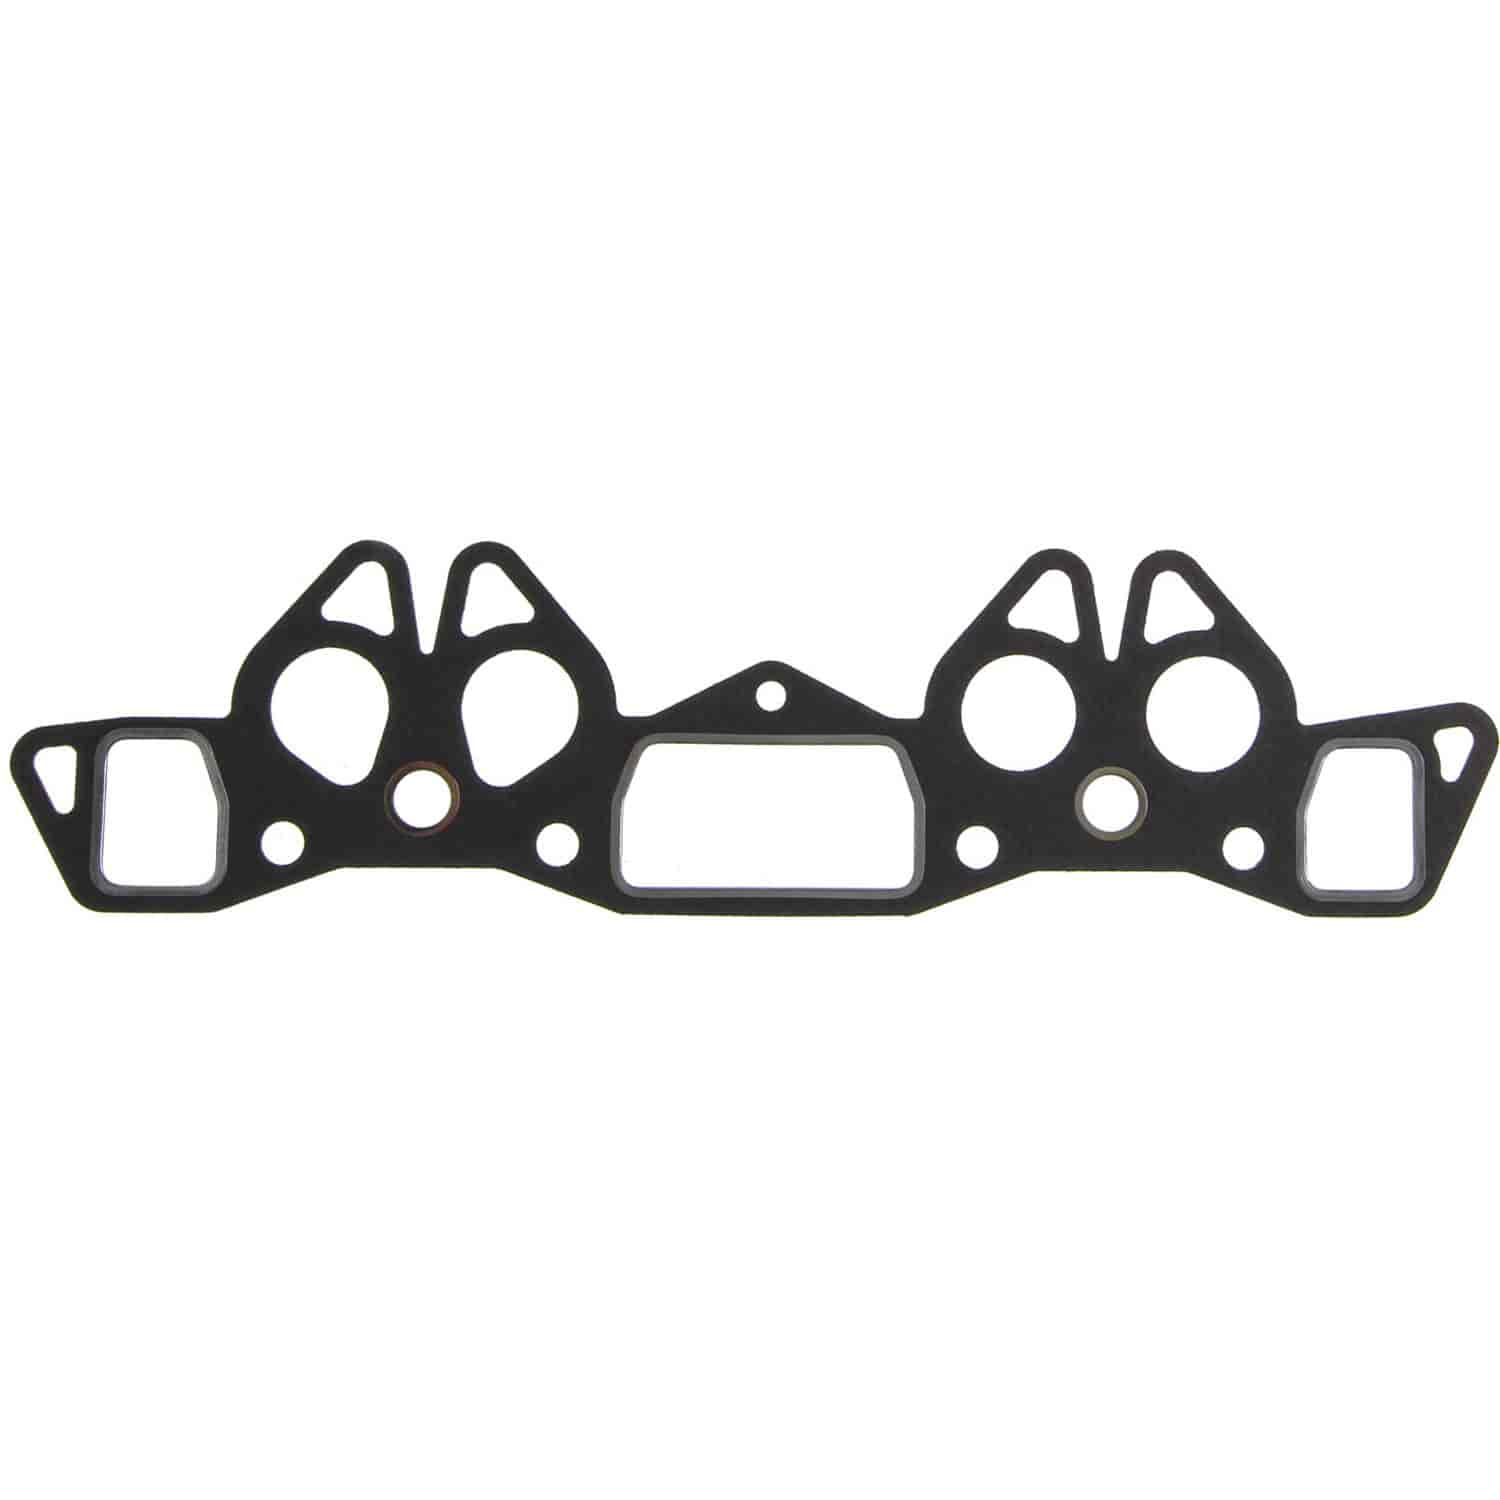 Intake And Exhaust Manifold Set Datsun 510 521 610 620 710 67-77 int&exh